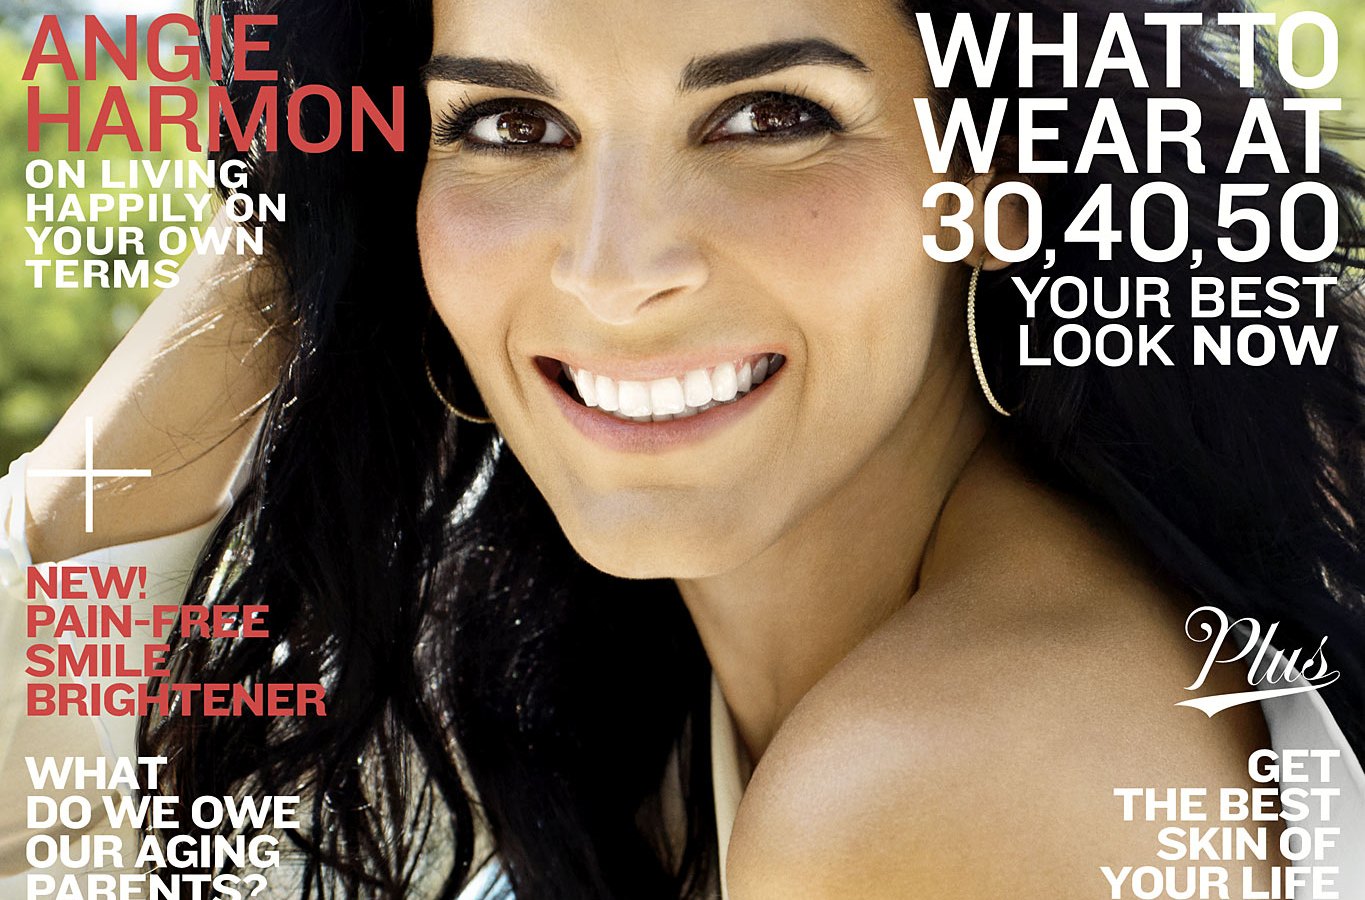 Angie Harmon on the cover of More Magazine